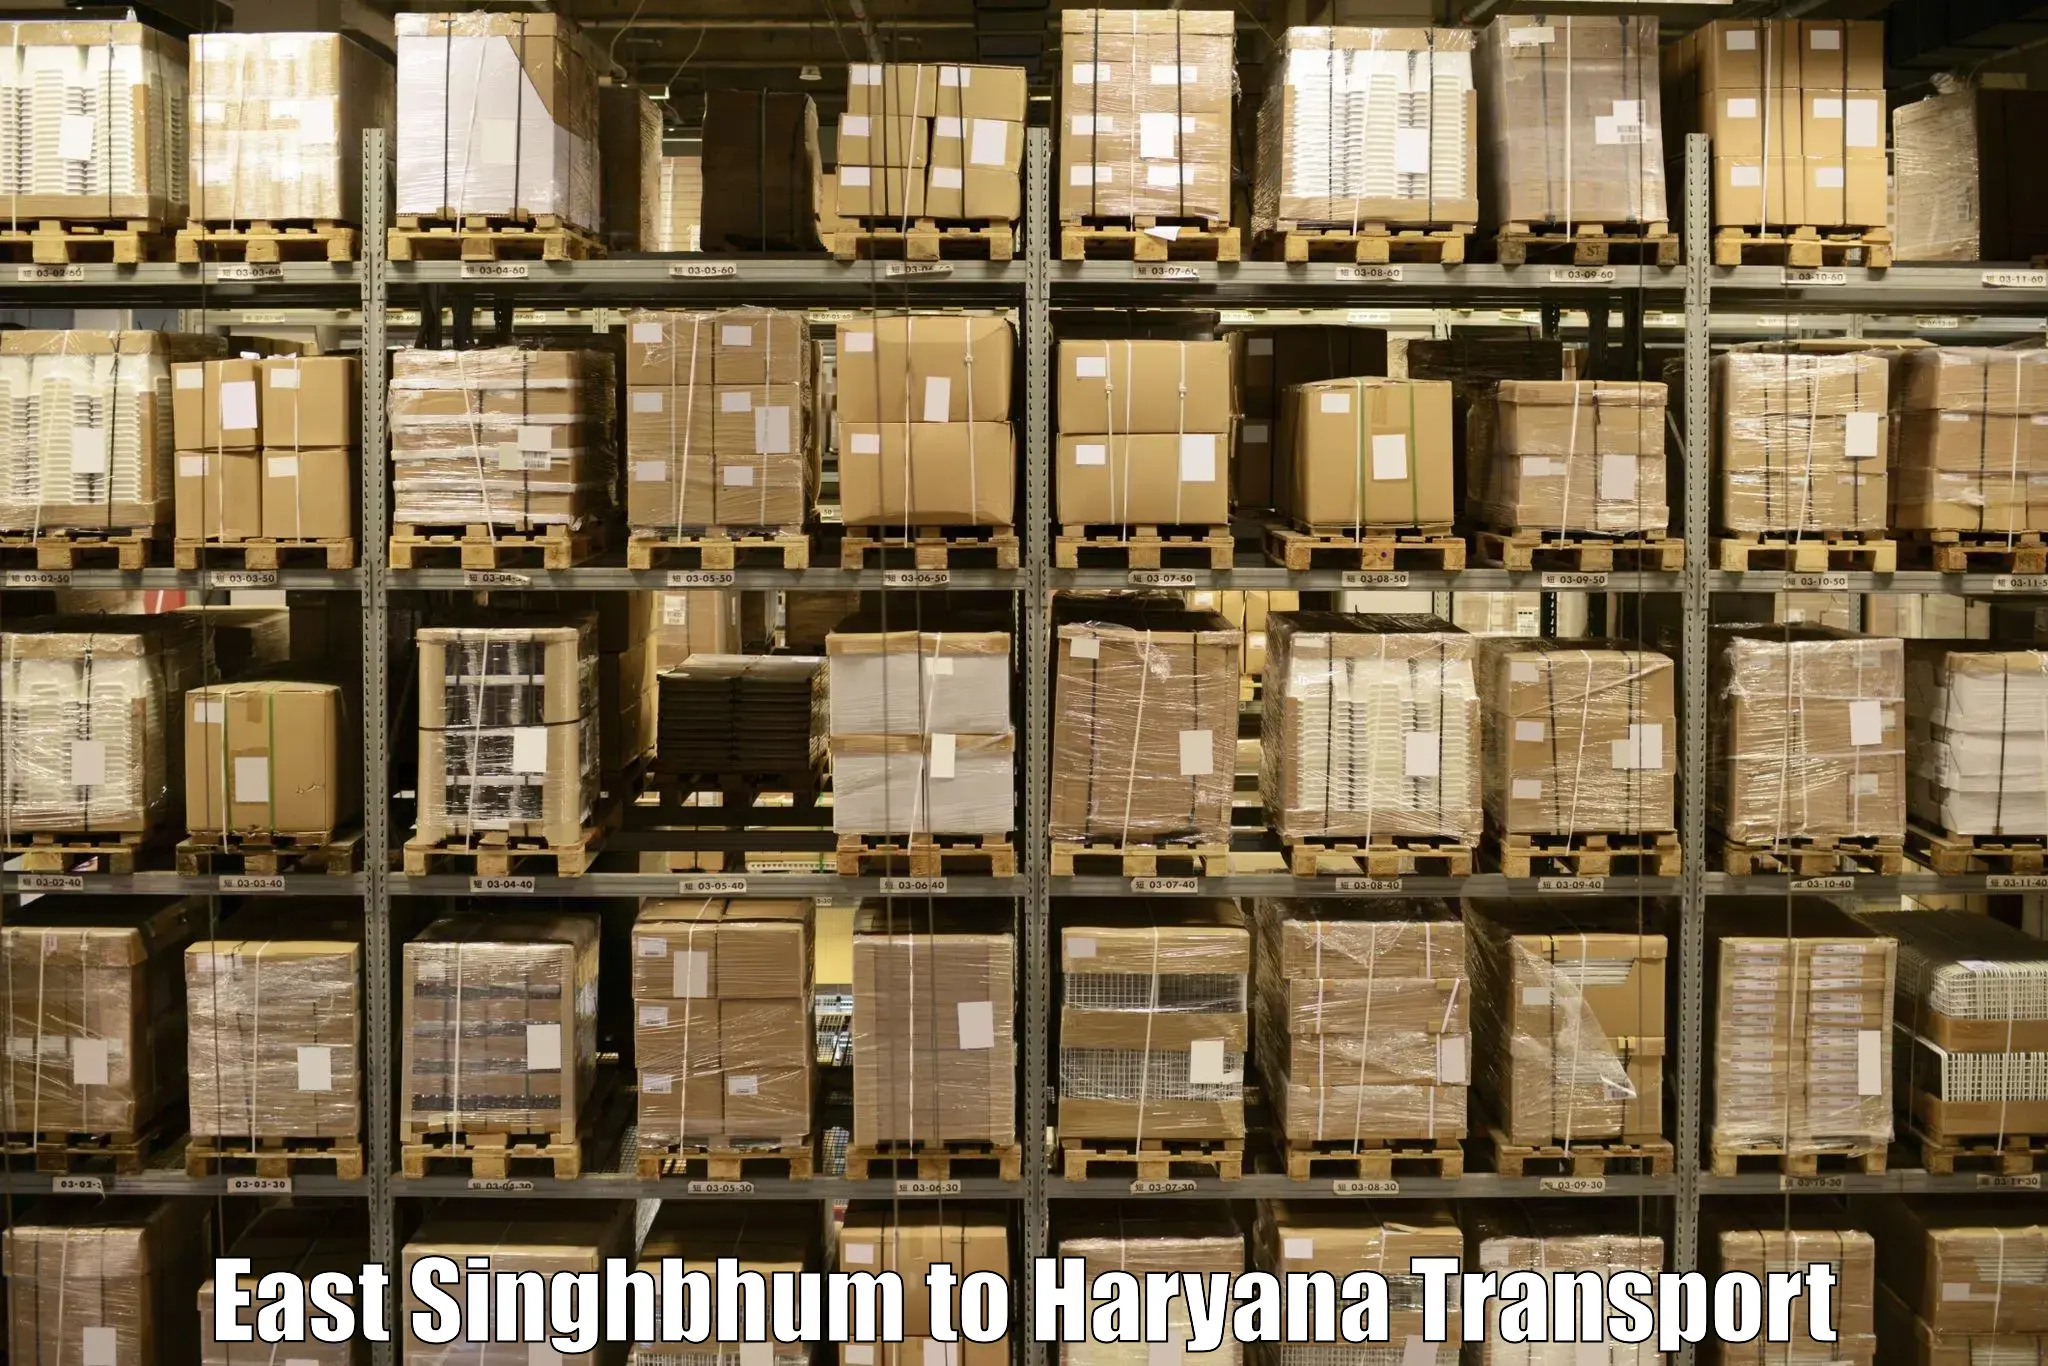 Parcel transport services East Singhbhum to Bhiwani